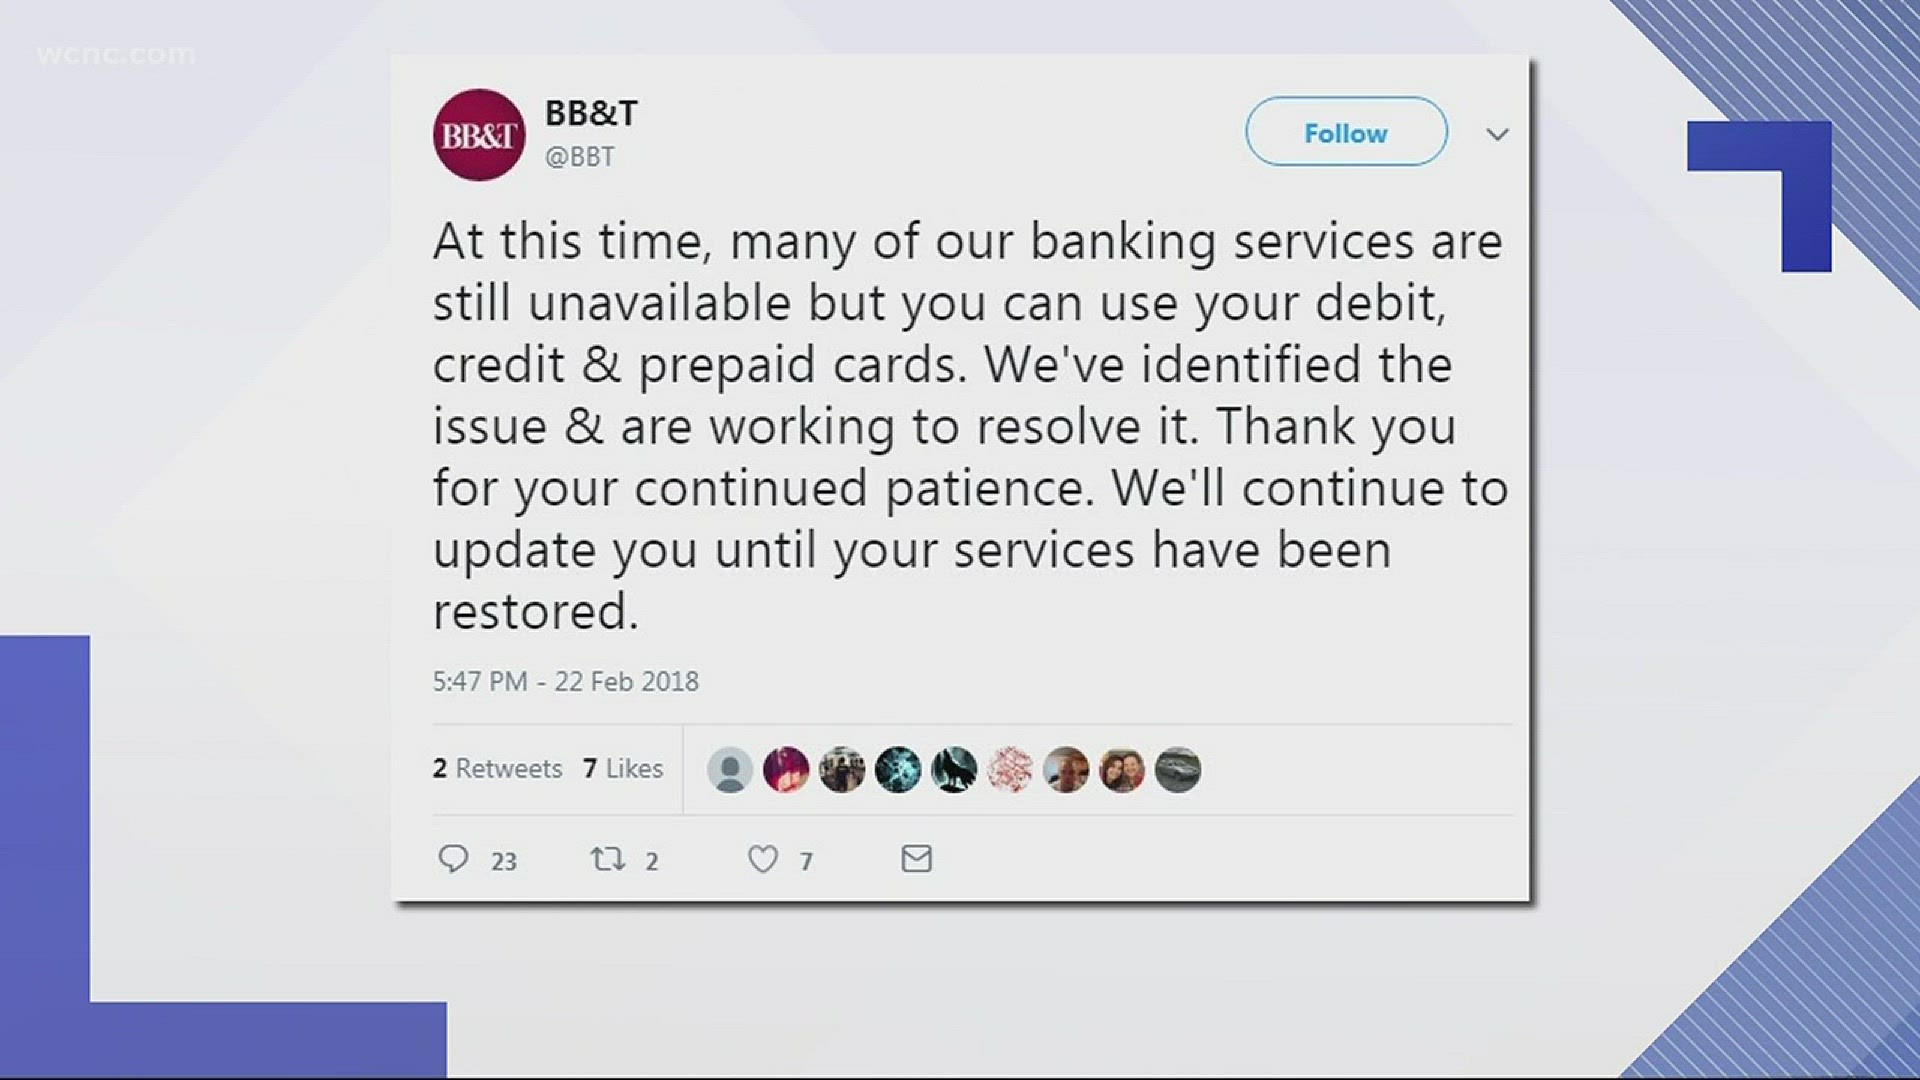 Several BB&T banking services unavailable